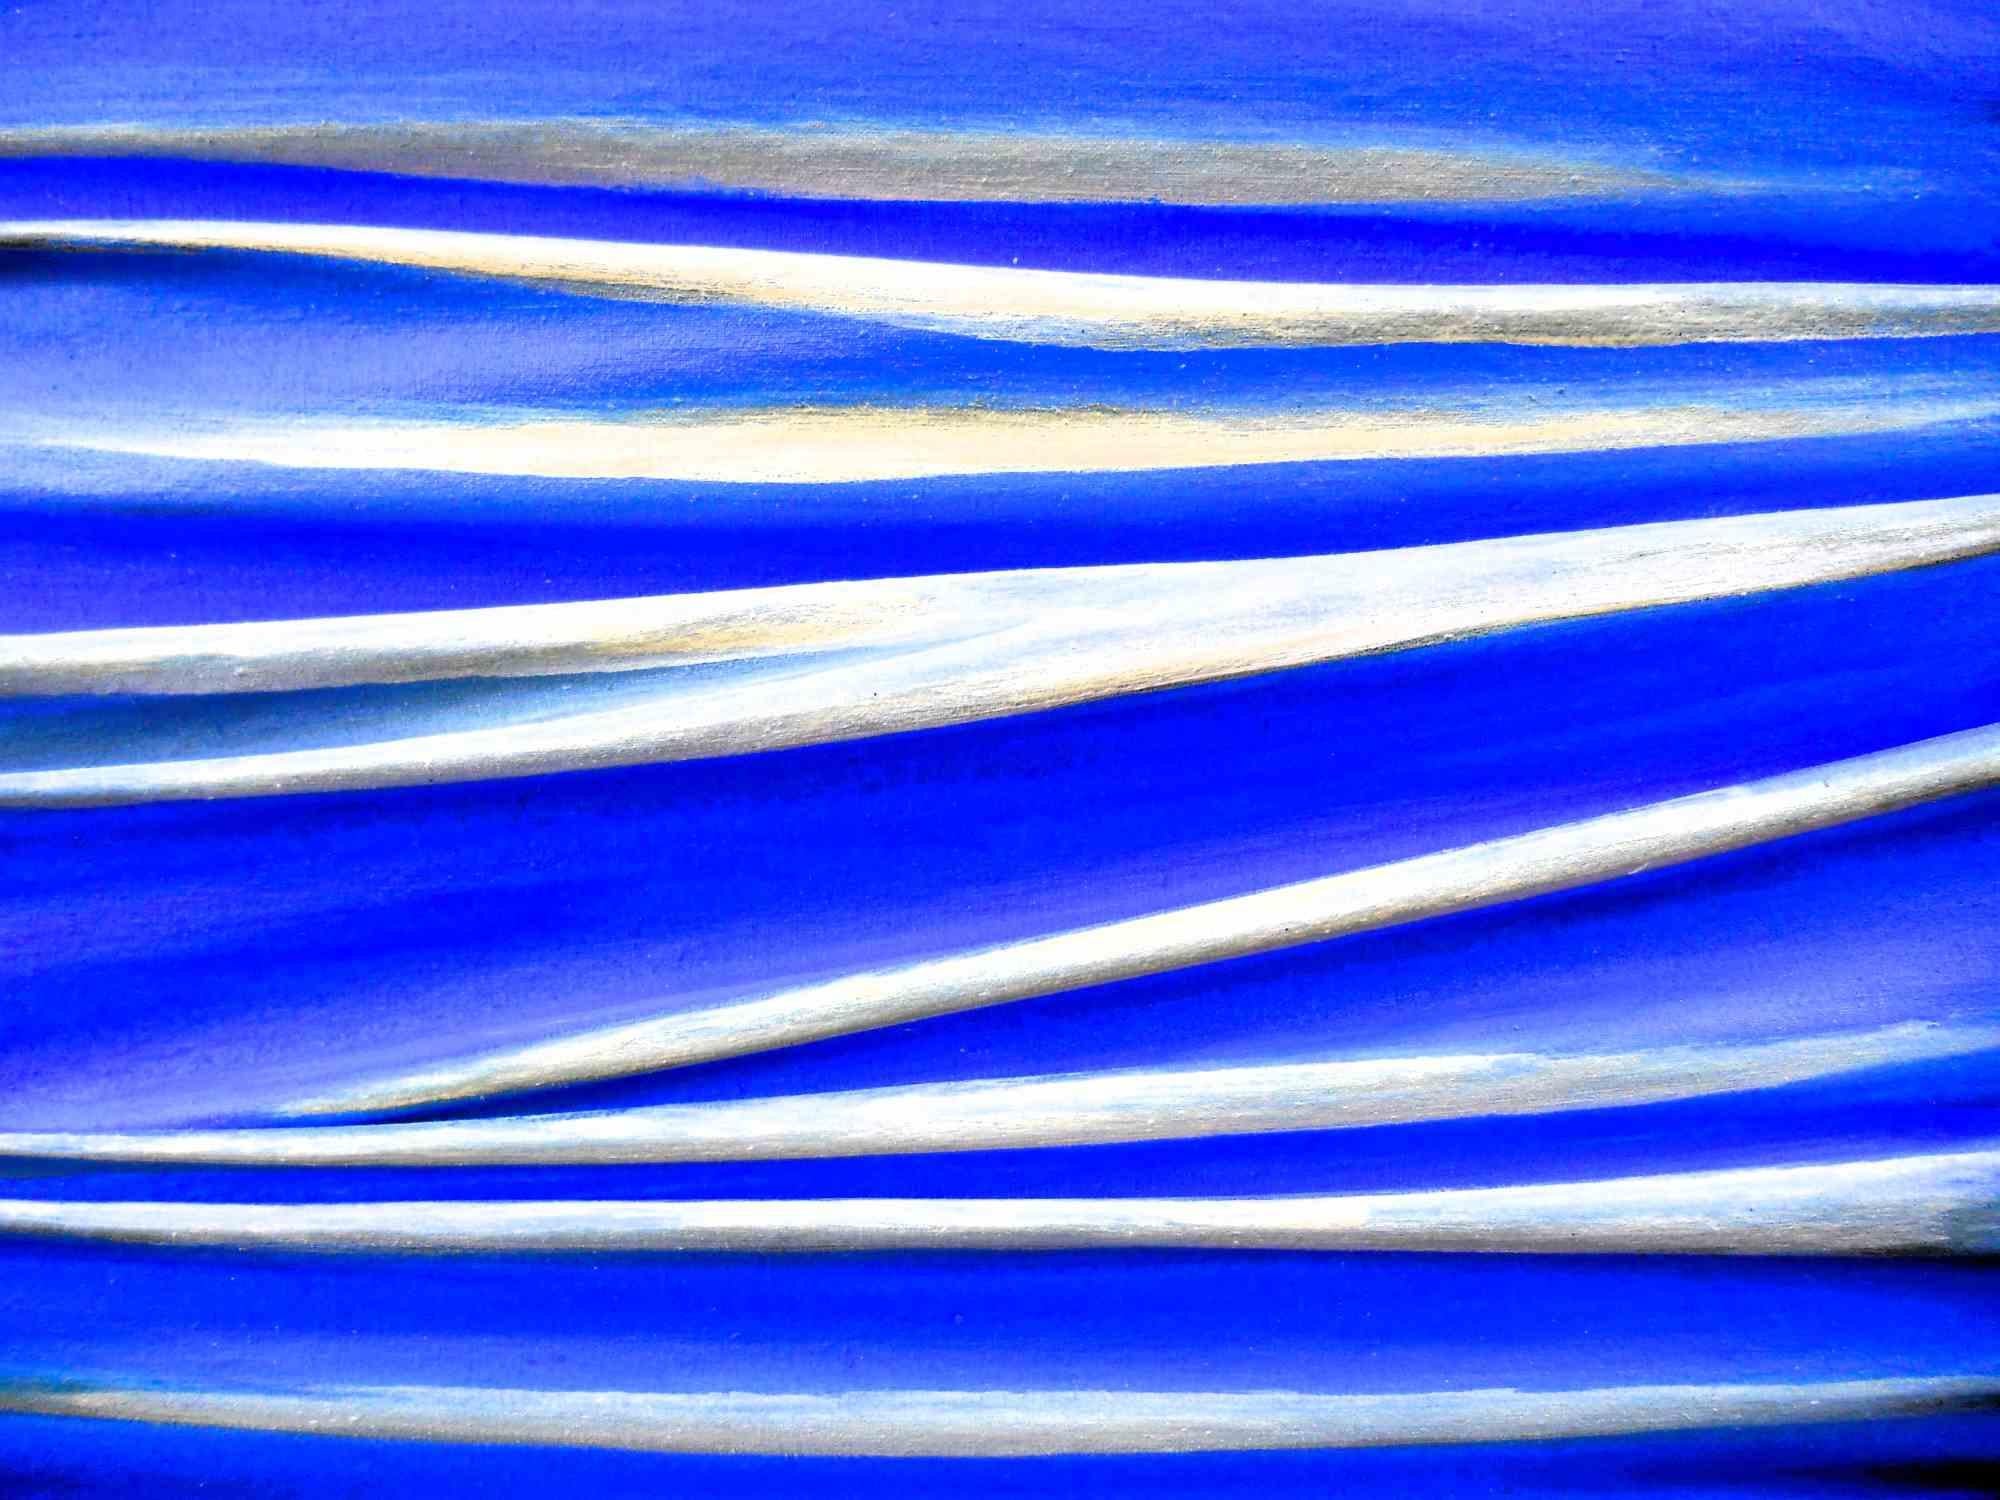 Canvas folded horizontally. The folds of the canvas create signs that go into the real depth of space and create the third dimension.

I love blue, it is the color of calm, of the depth of the sea and the universe. It is the color of silence, peace,